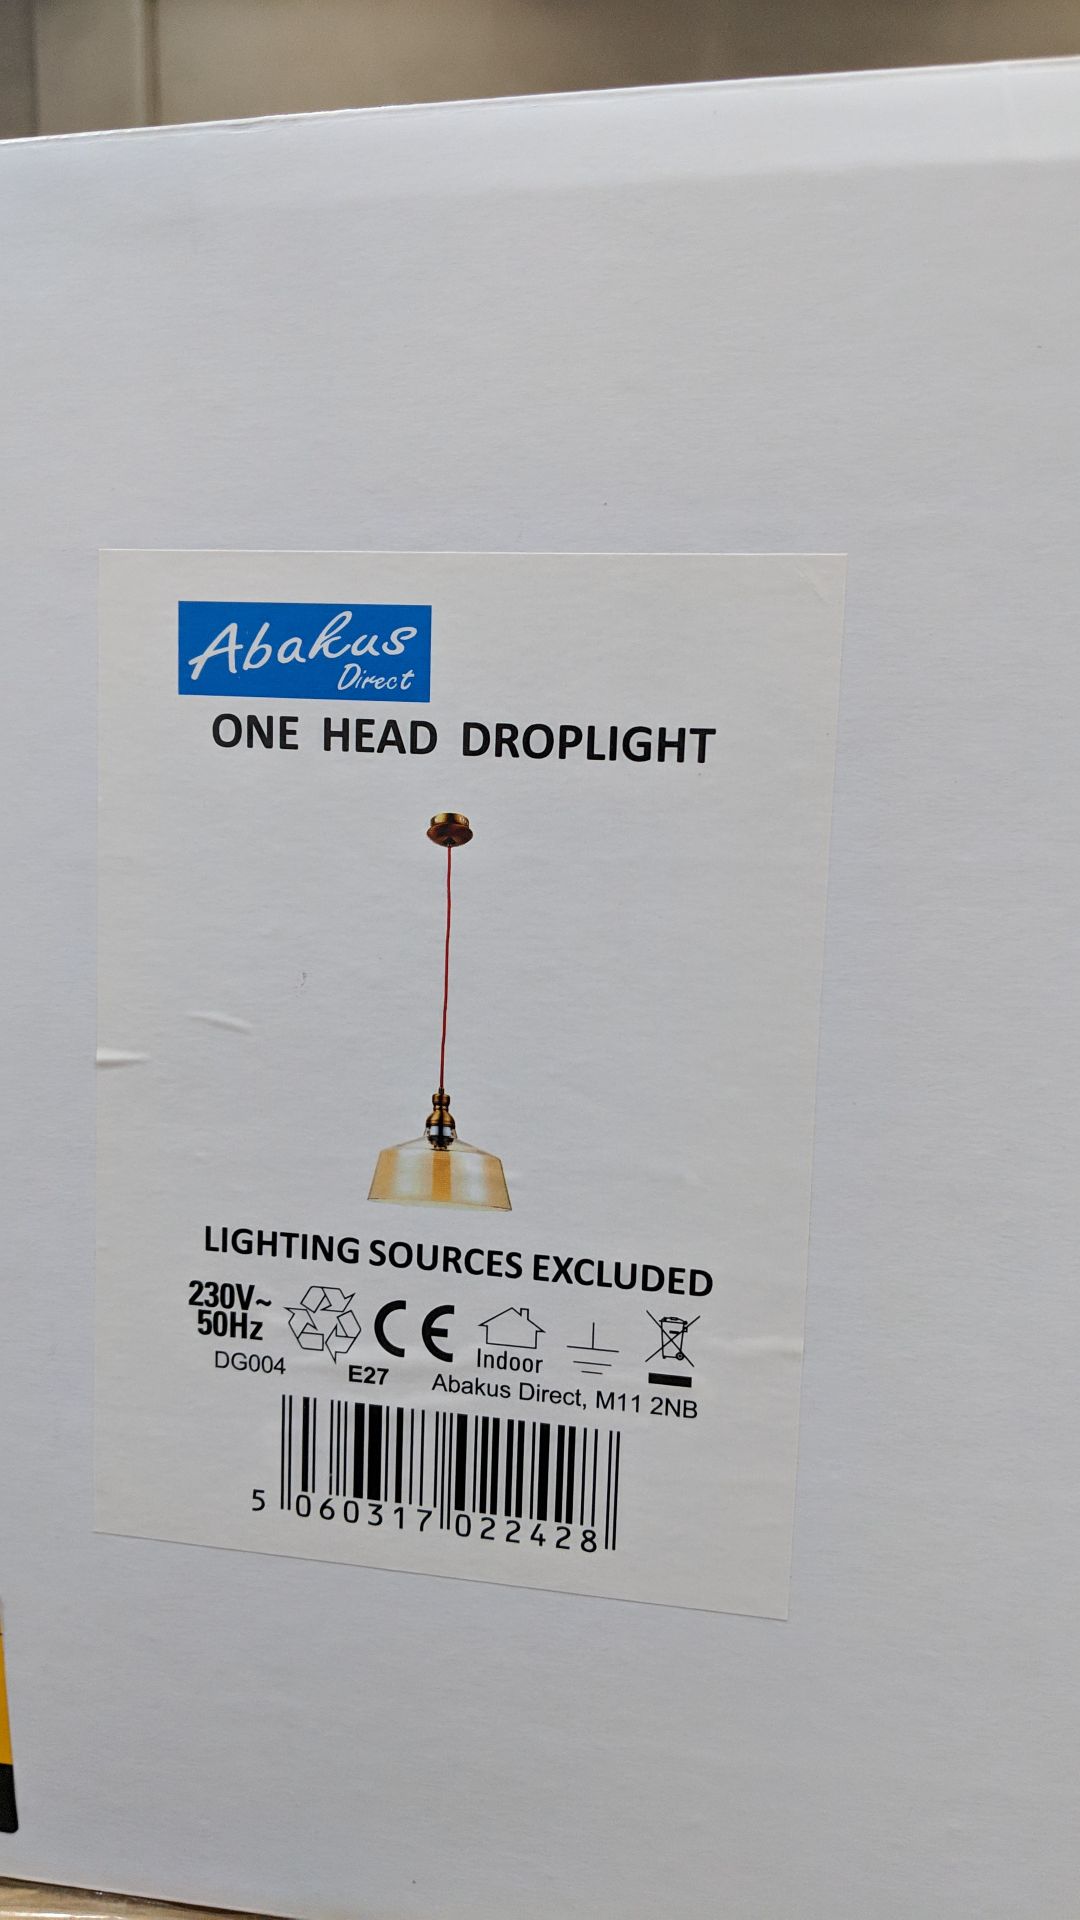 16 off Abakus model DG004 one head droplight light fittings This lot is one of a number of lots in - Image 2 of 2